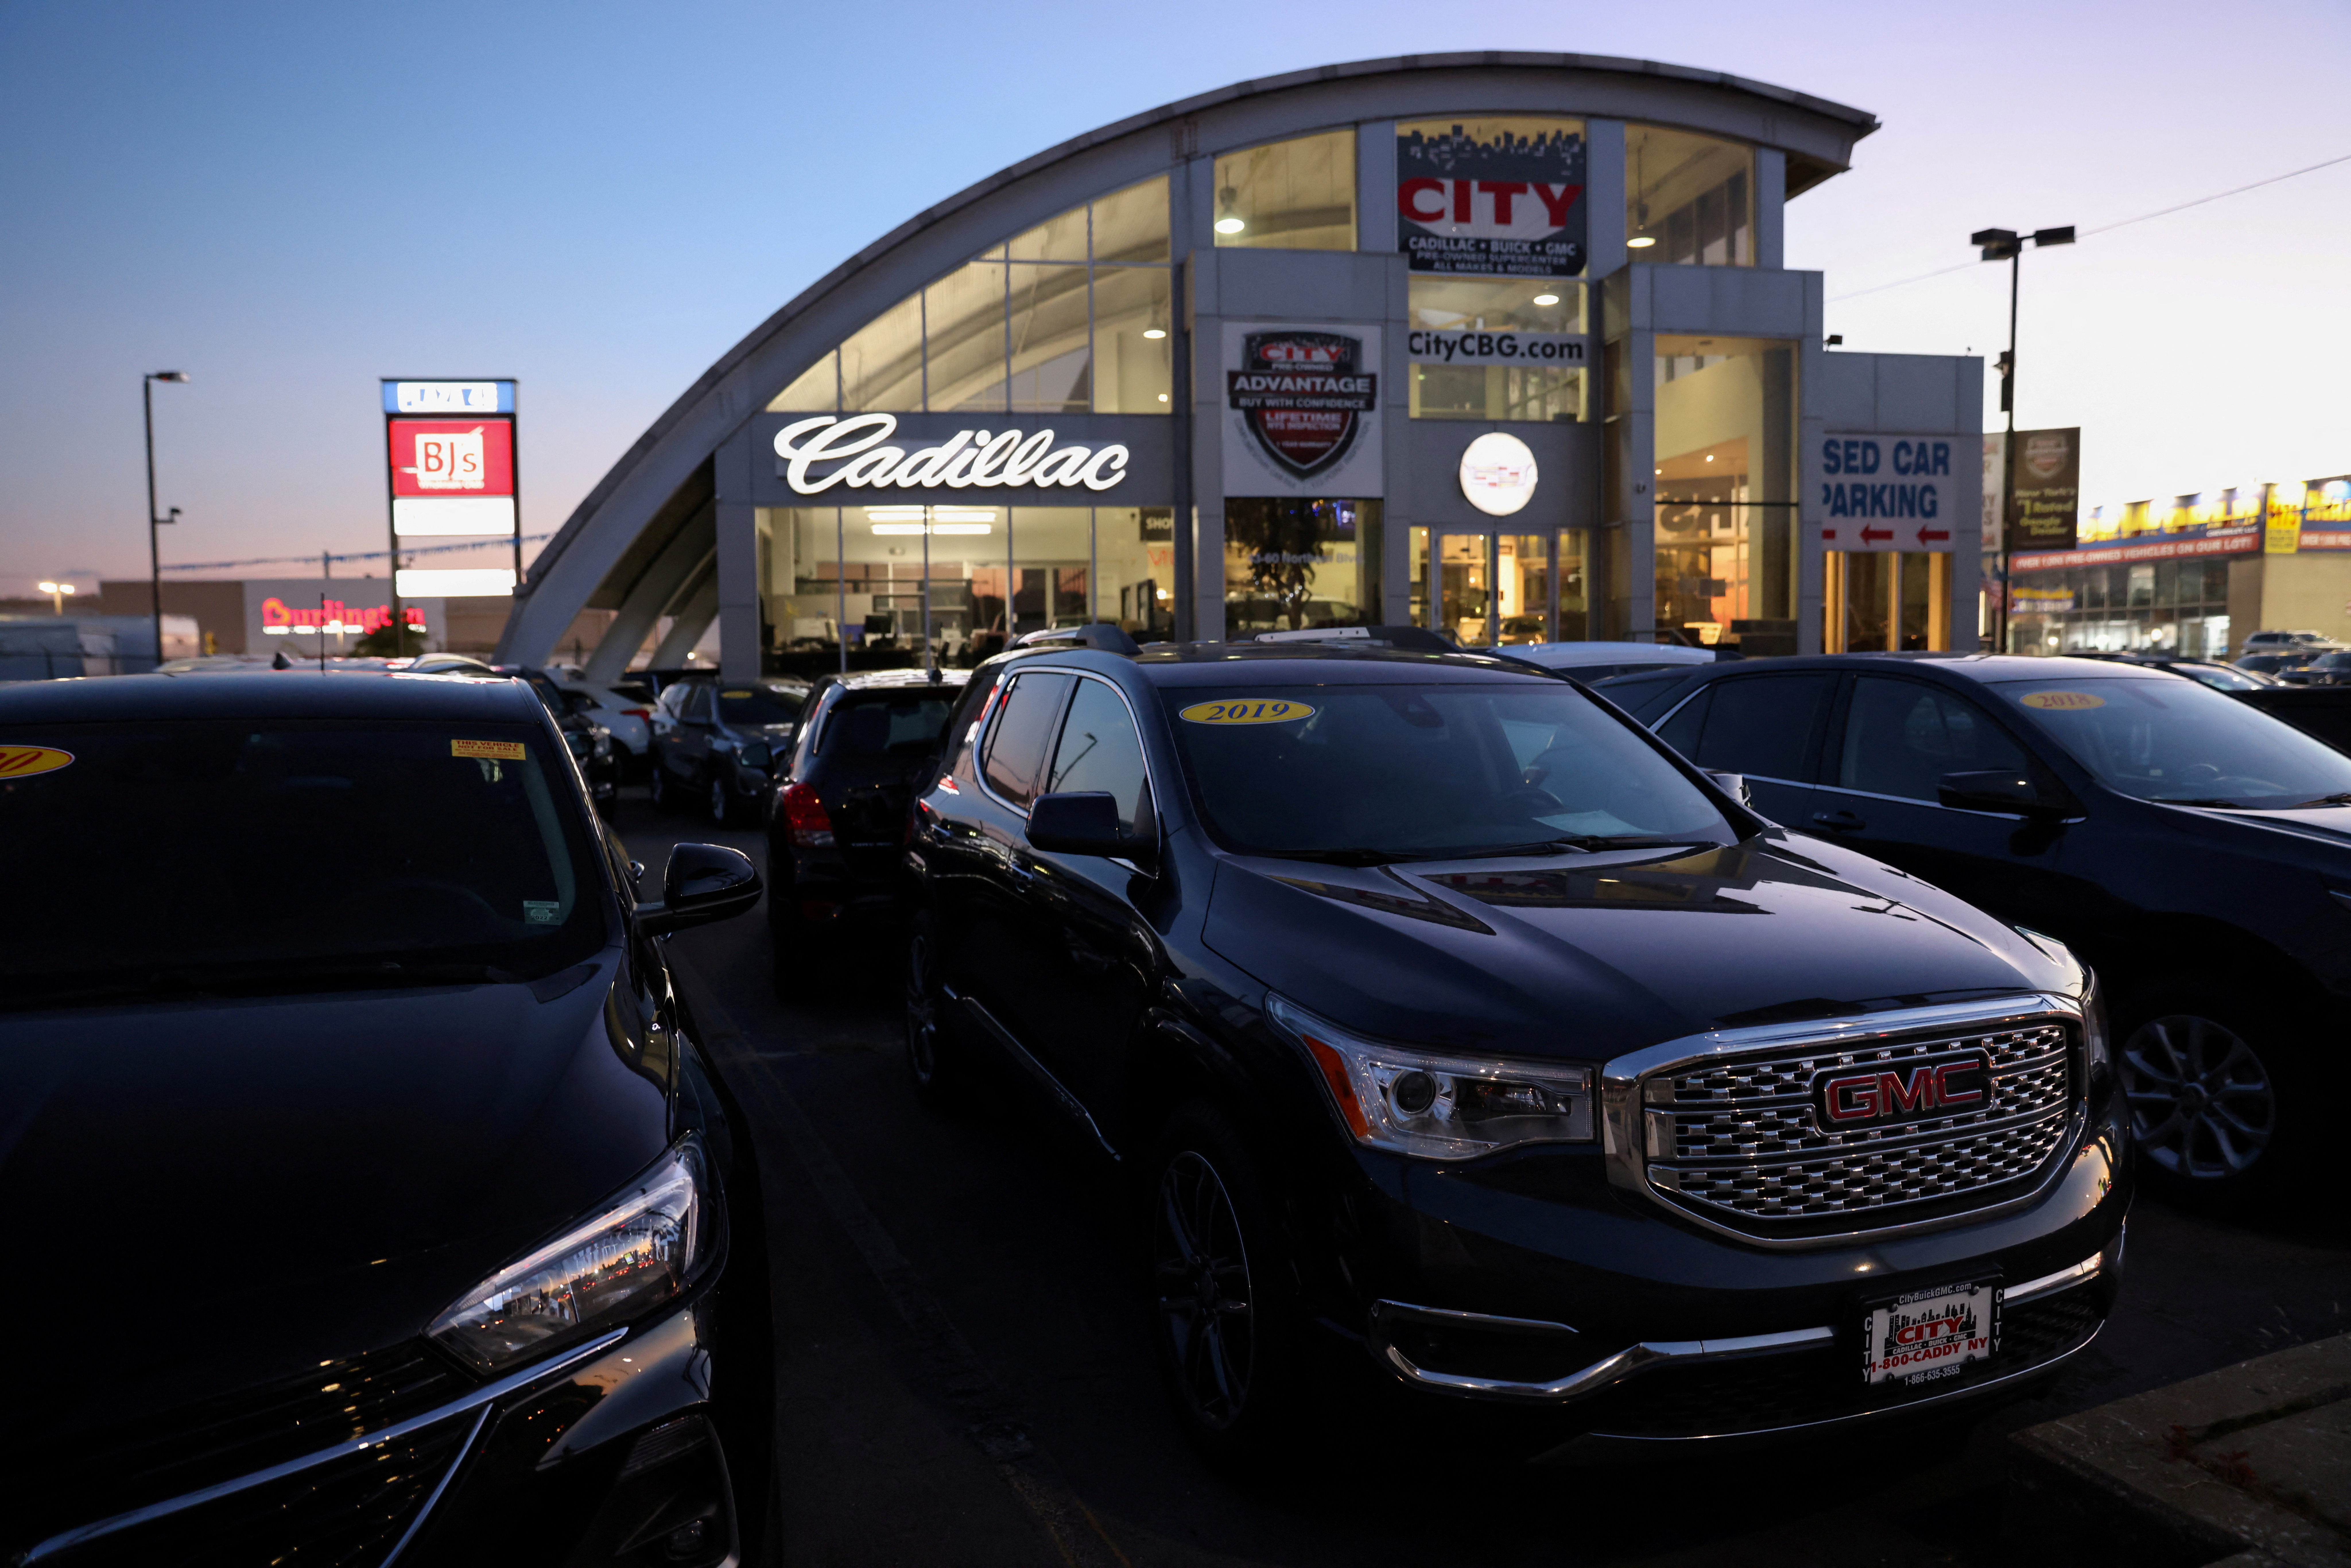 Vehicles of automobile brands belonging to General Motors Company are seen at a car dealership in Queens, New York